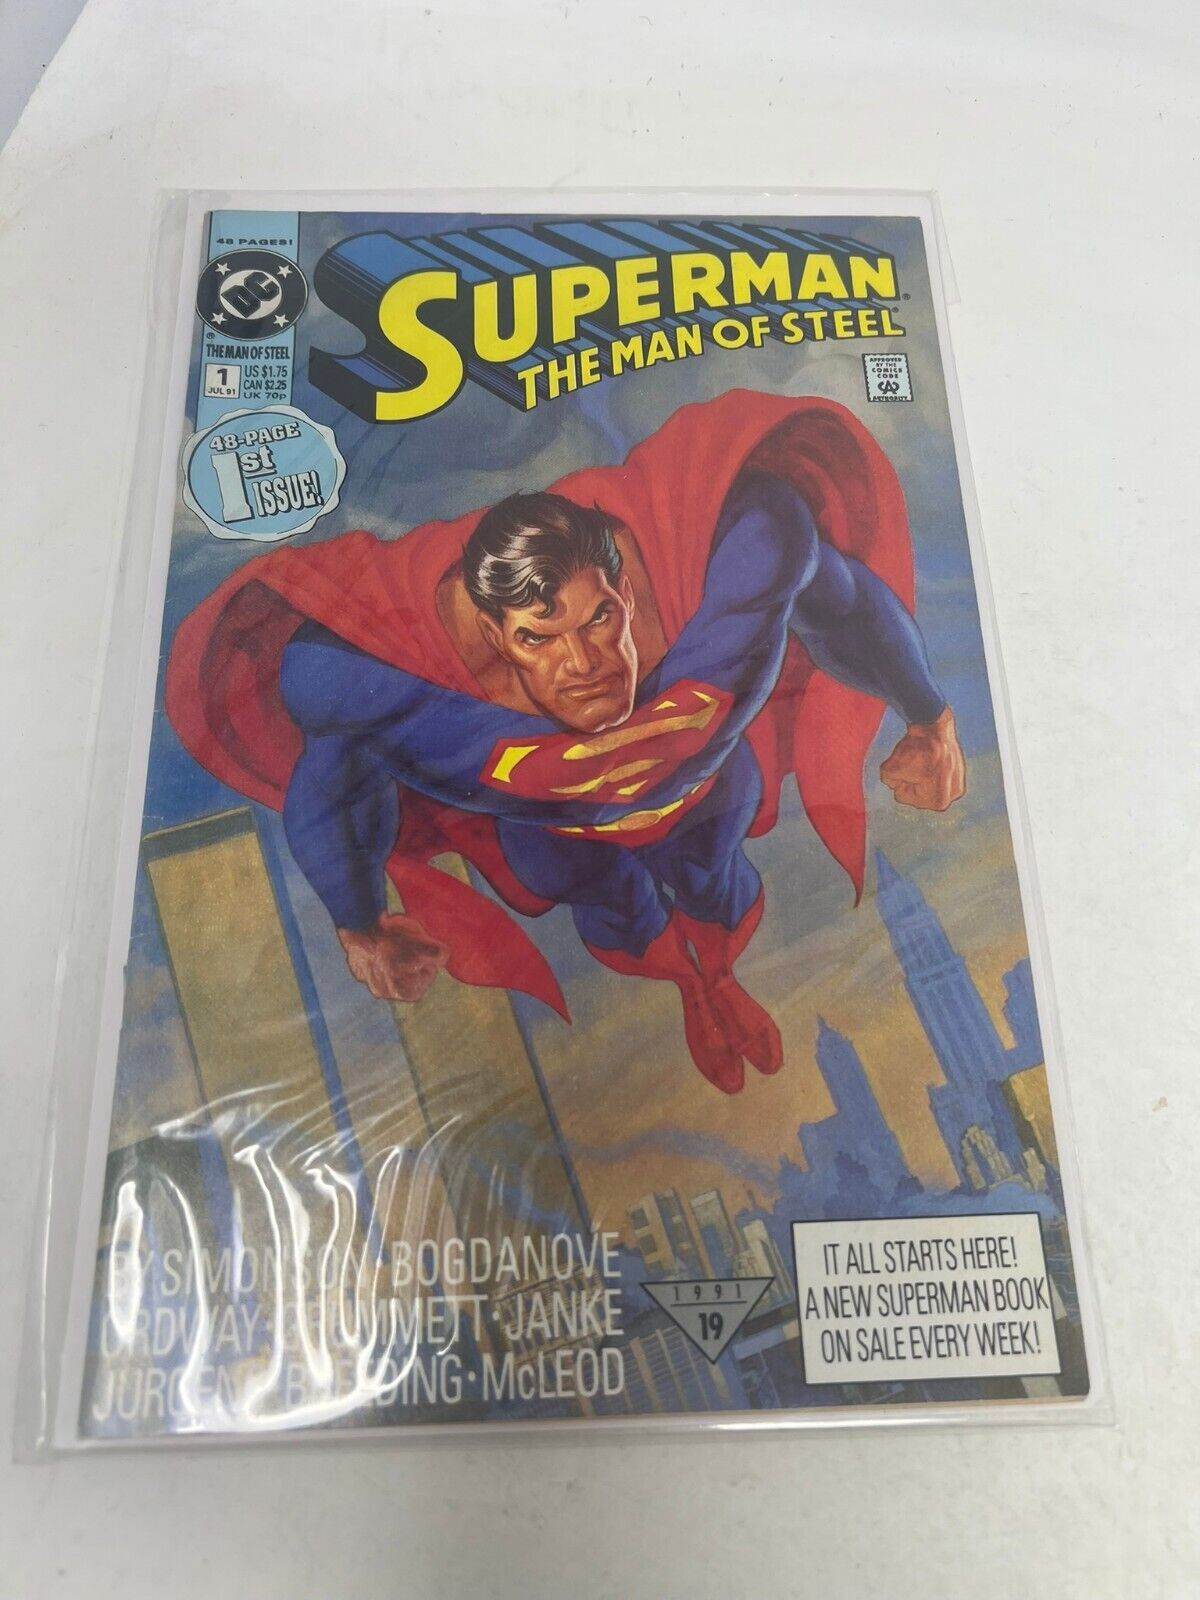 SUPERMAN THE MAN OF STEEL #1 JULY 1991 DC COMICS 48 PAGE 1ST ISSUE FABULOUS